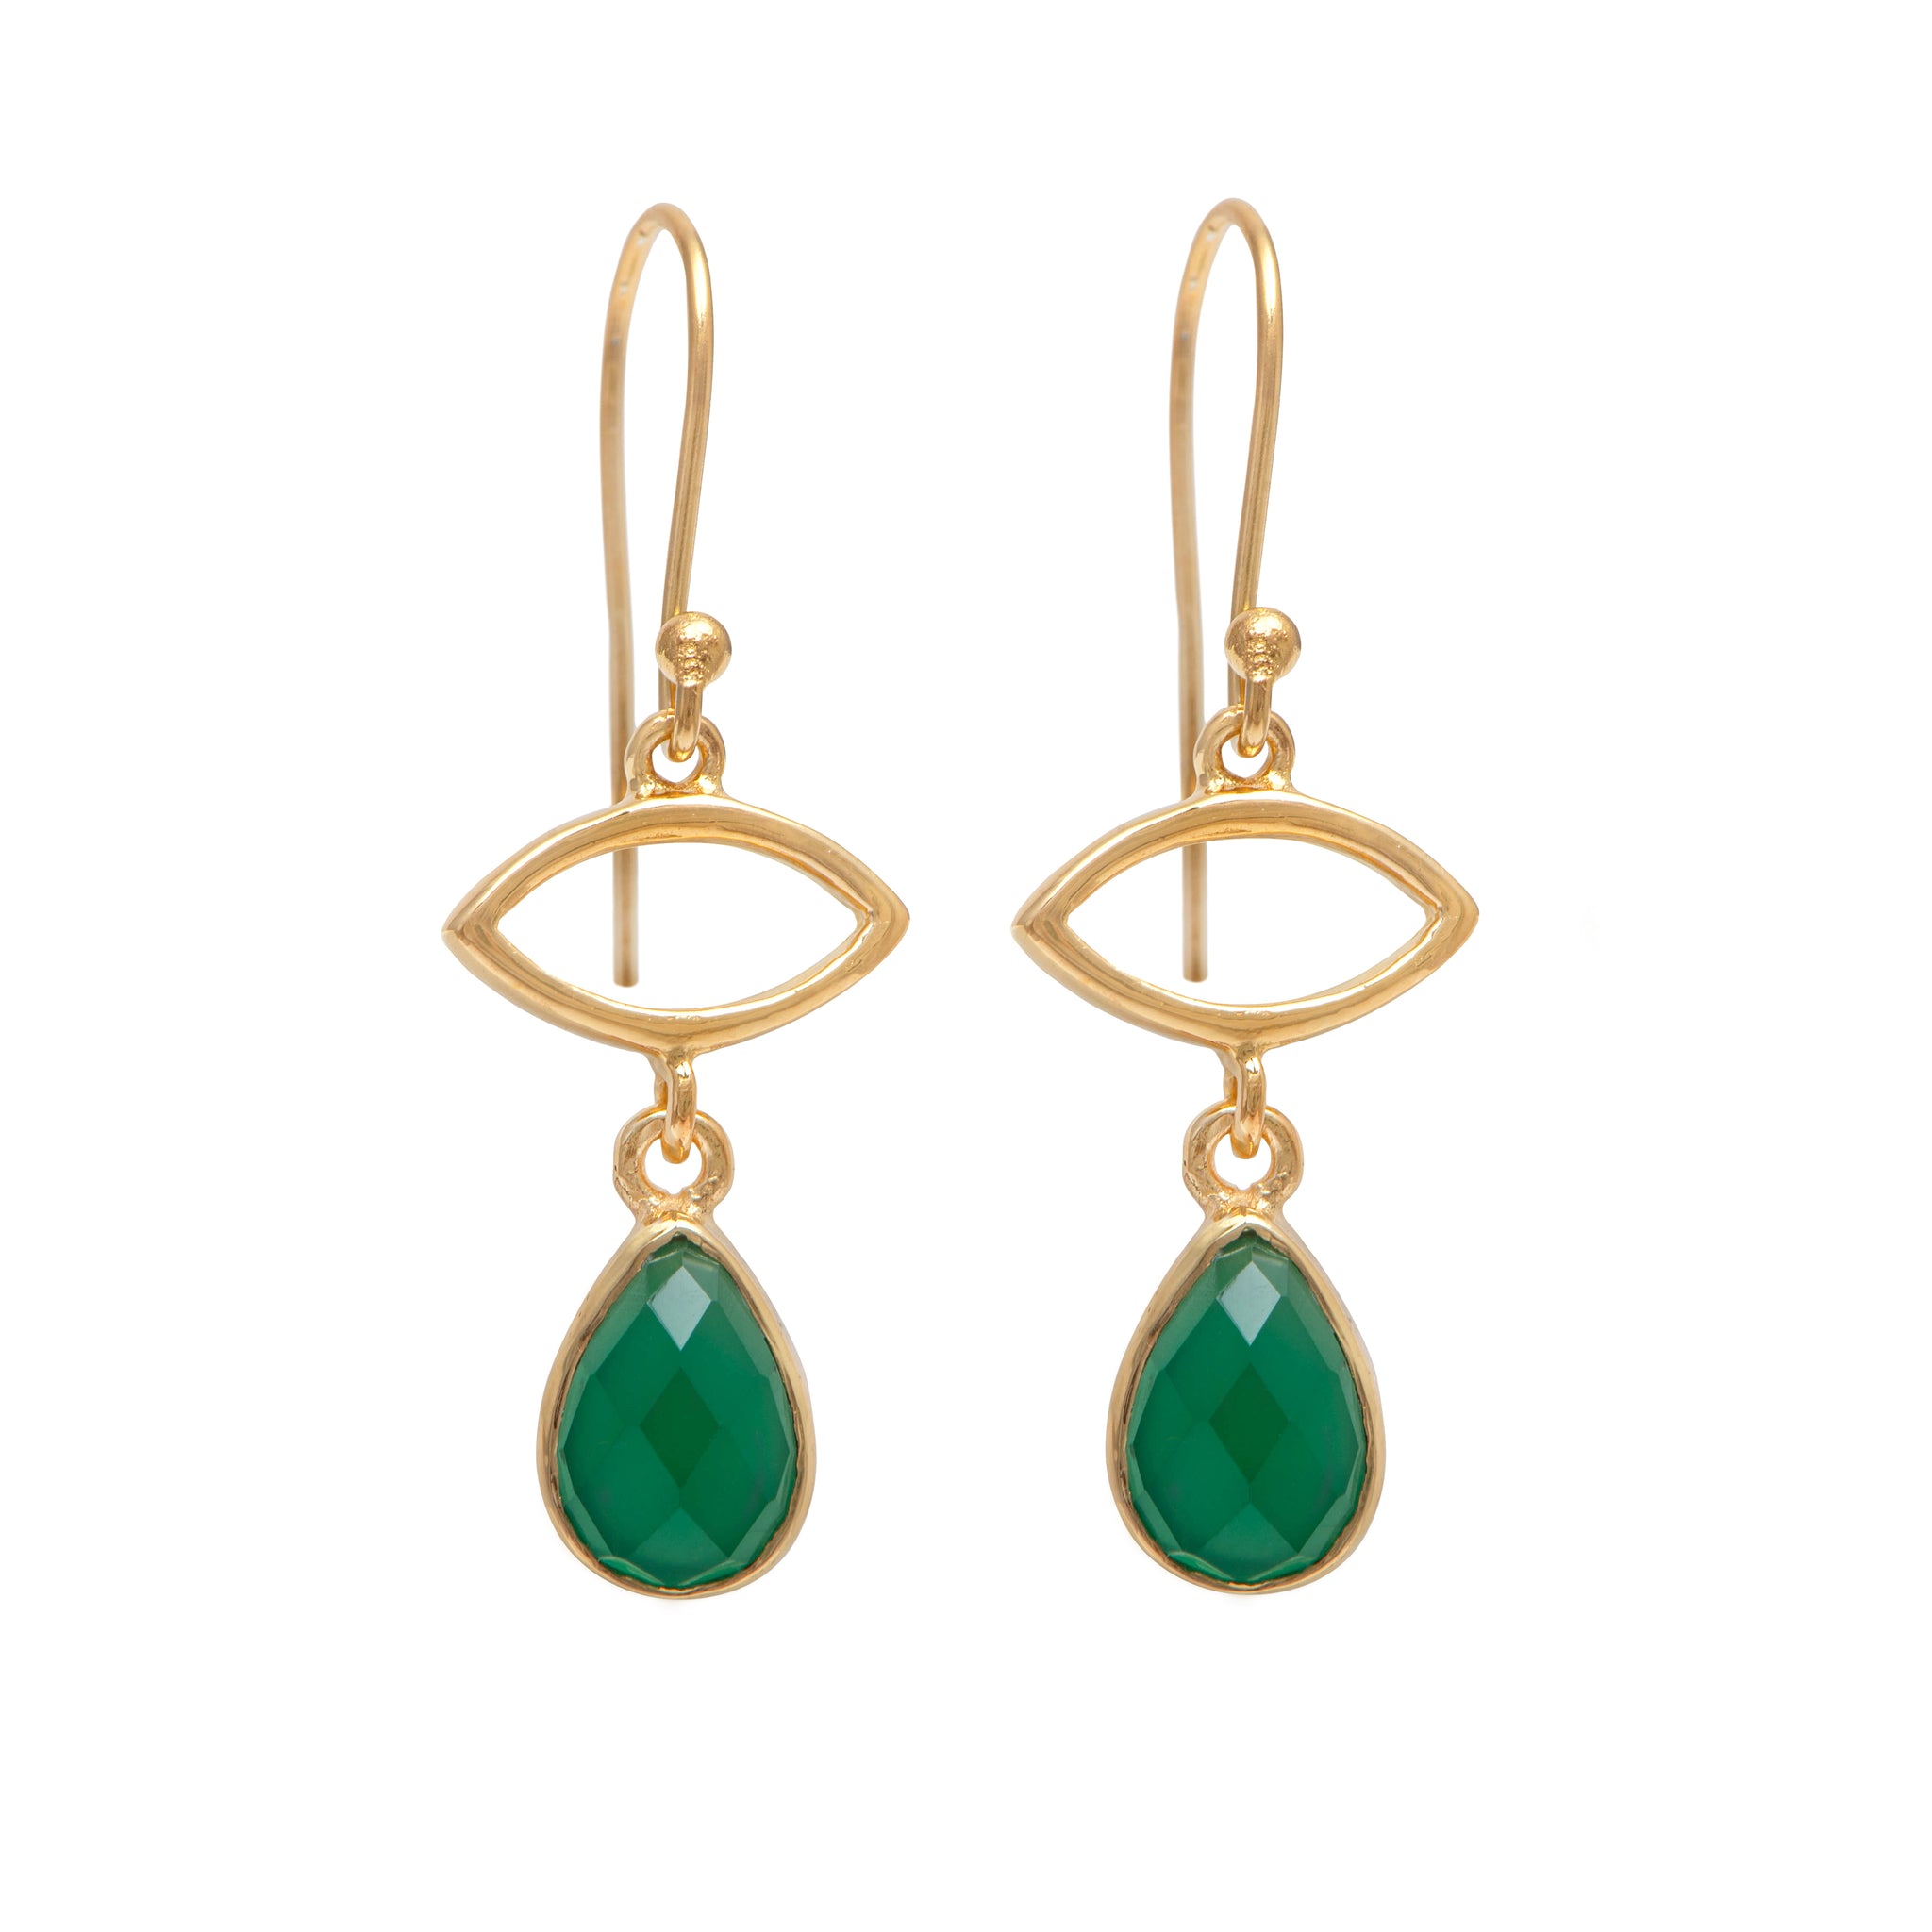 Gold Plated Drop Earrings with Green Onyx Gemstone – Milina London